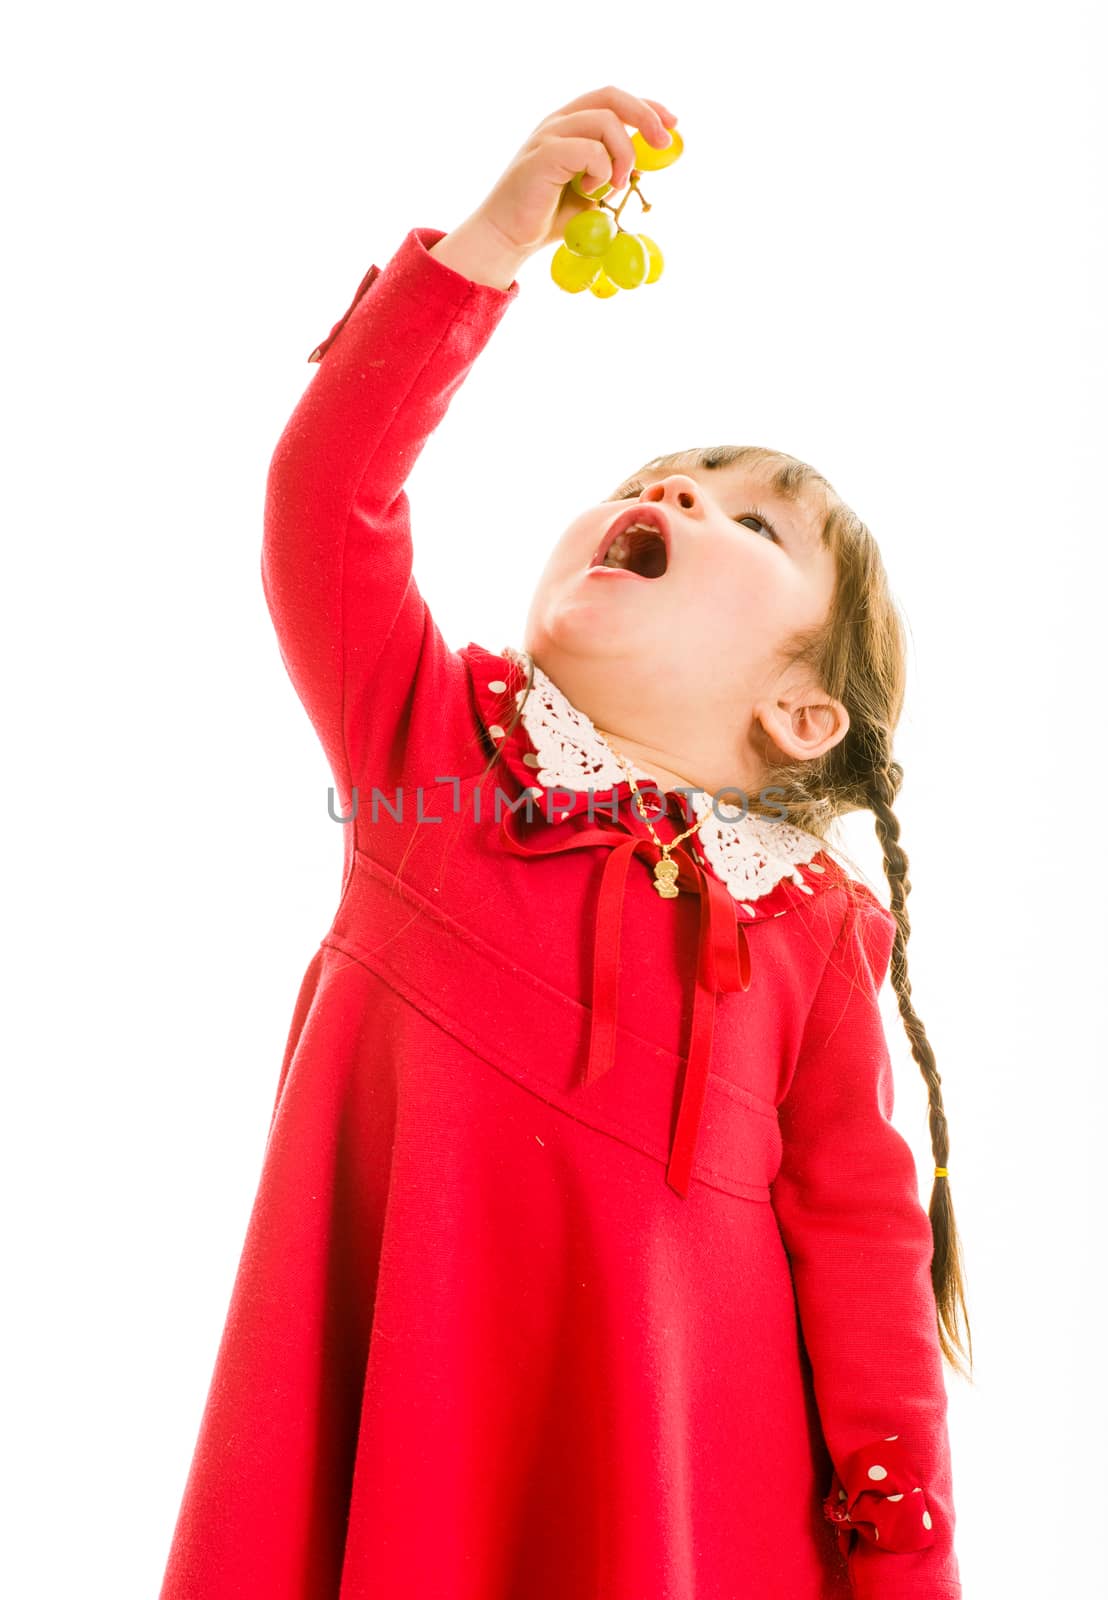 Young child with green grapes in hand and open mouth